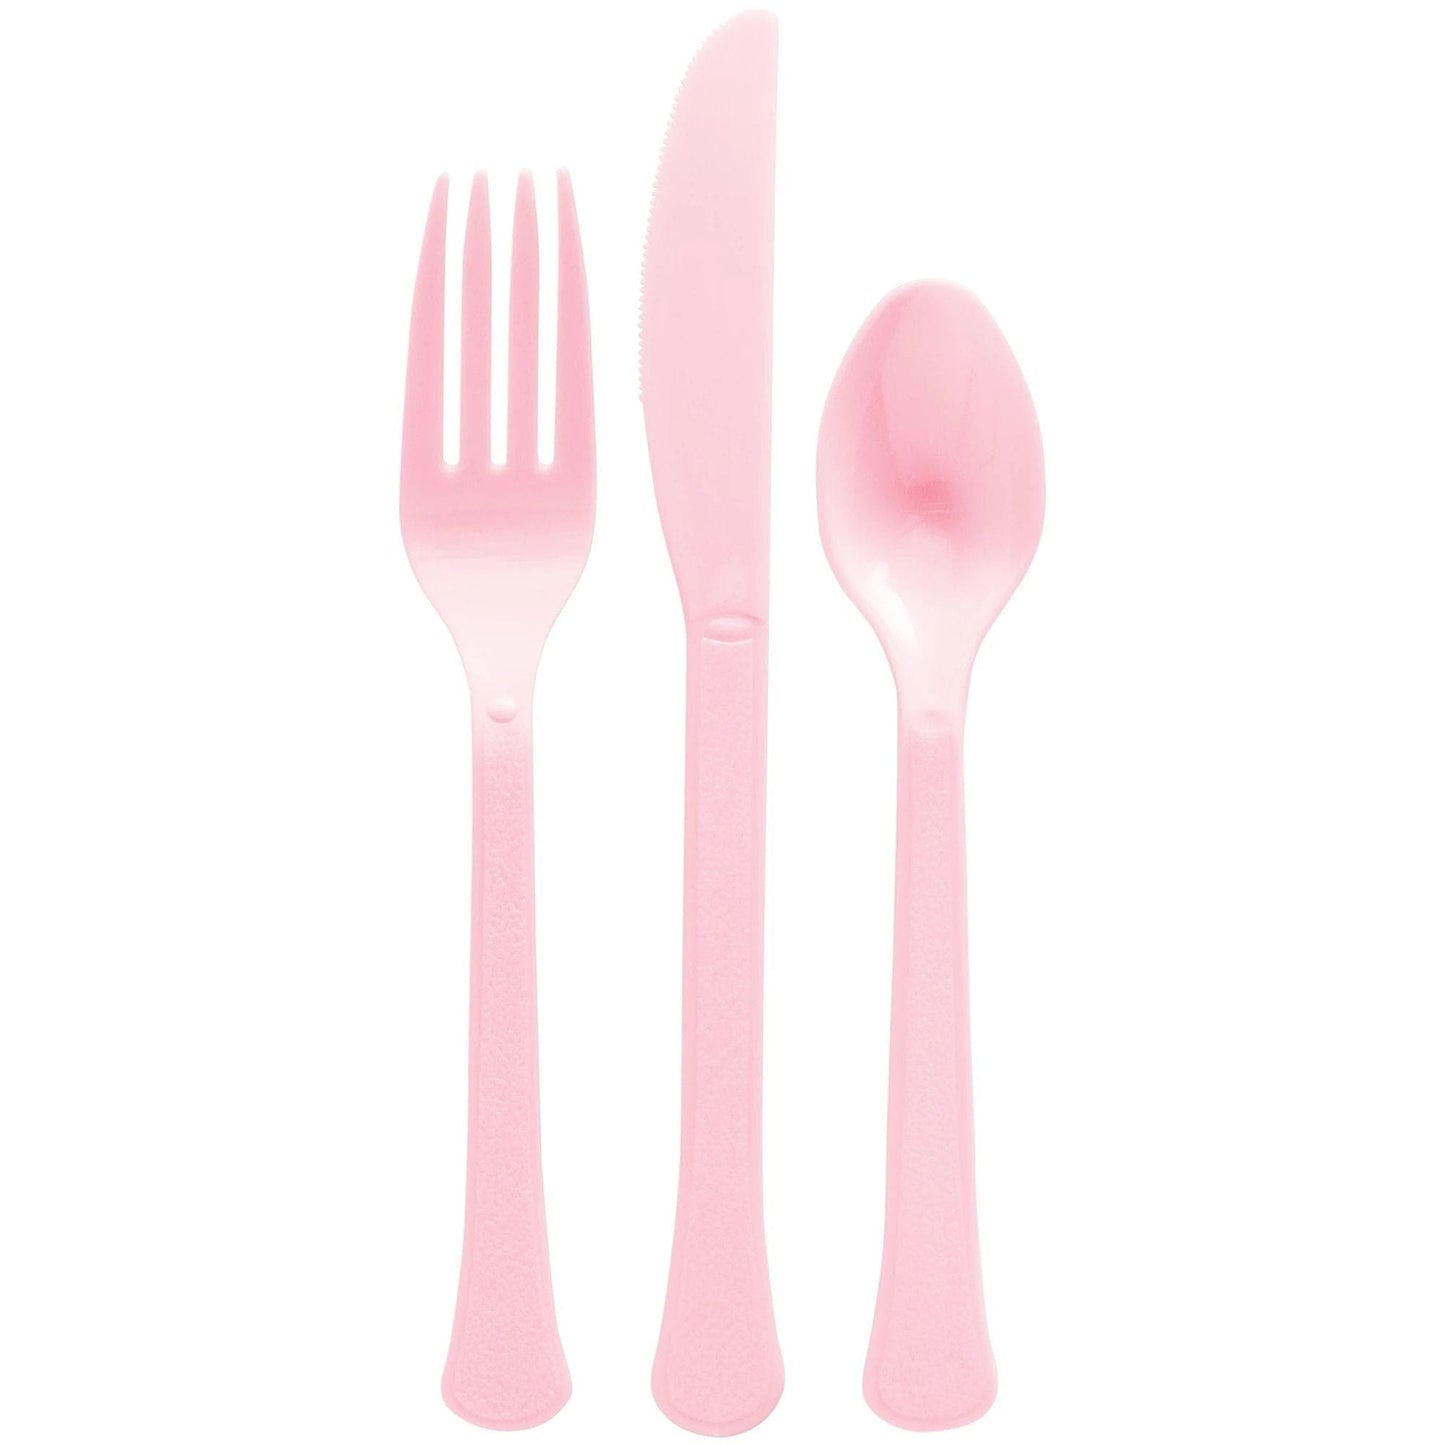 Heavy Weight Cutlery Asst., Mid Ct. - New Pink